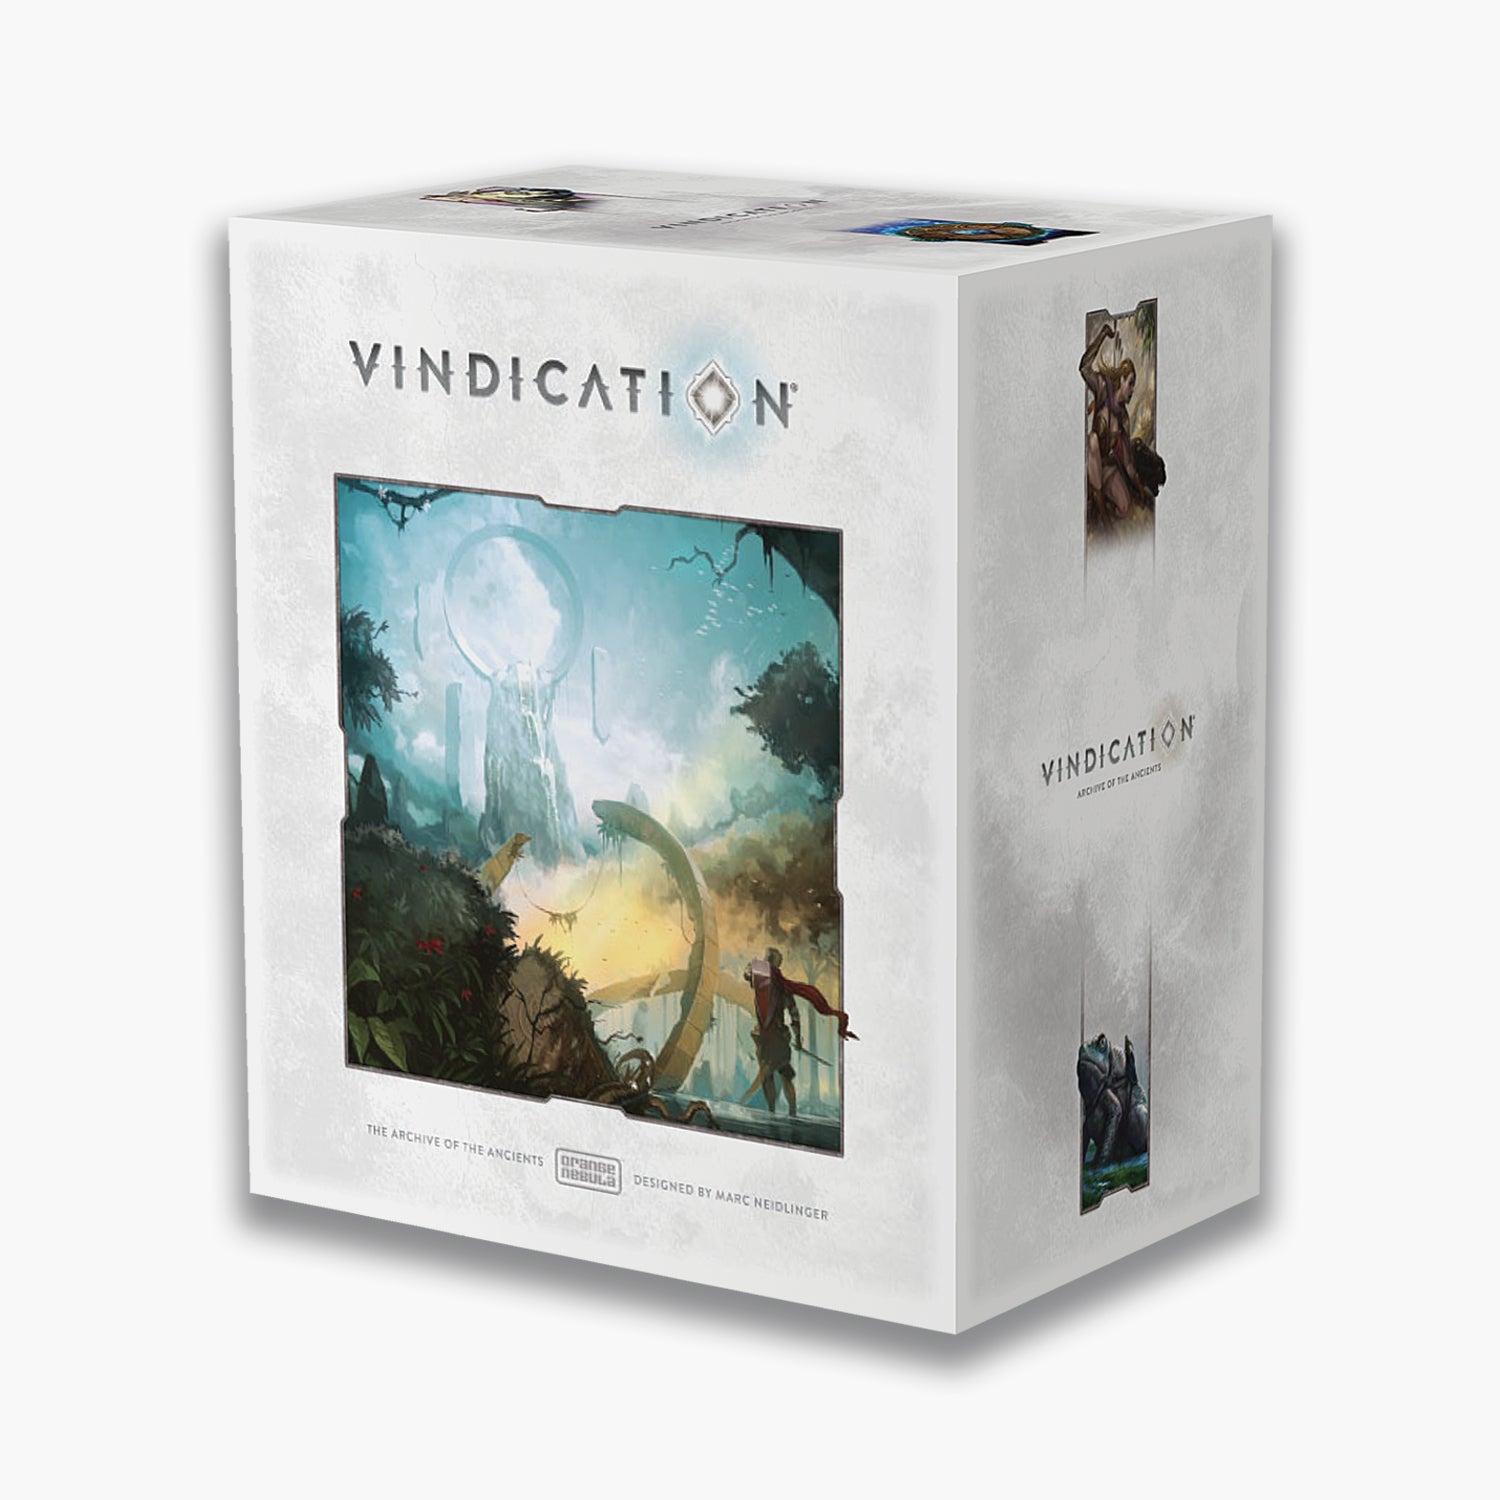 Vindication® Archive of the Ancients